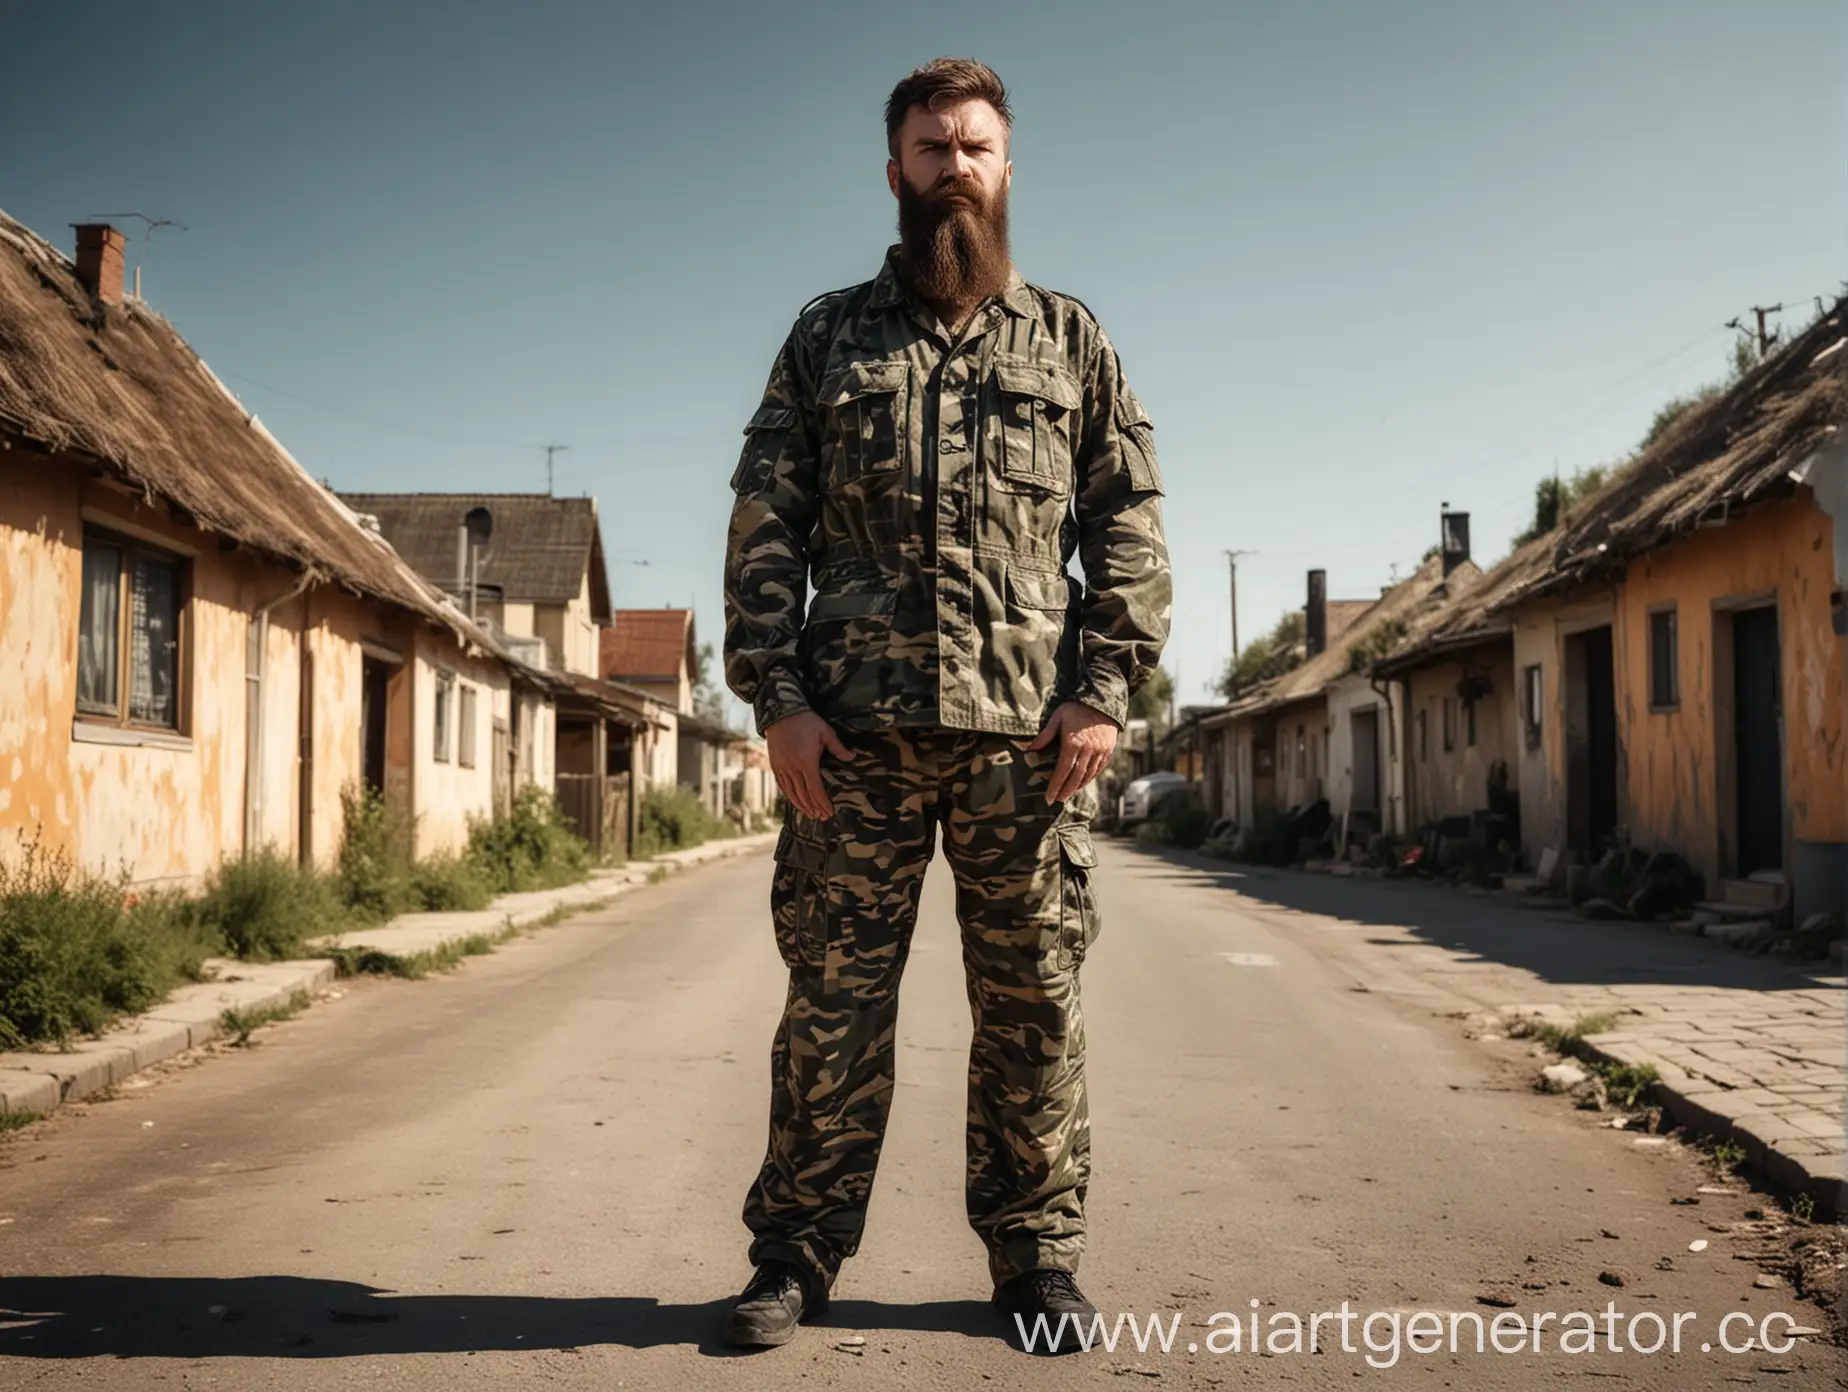 Angry-Bearded-Man-in-Camouflage-Suit-Standing-in-Village-Under-Hot-Sun